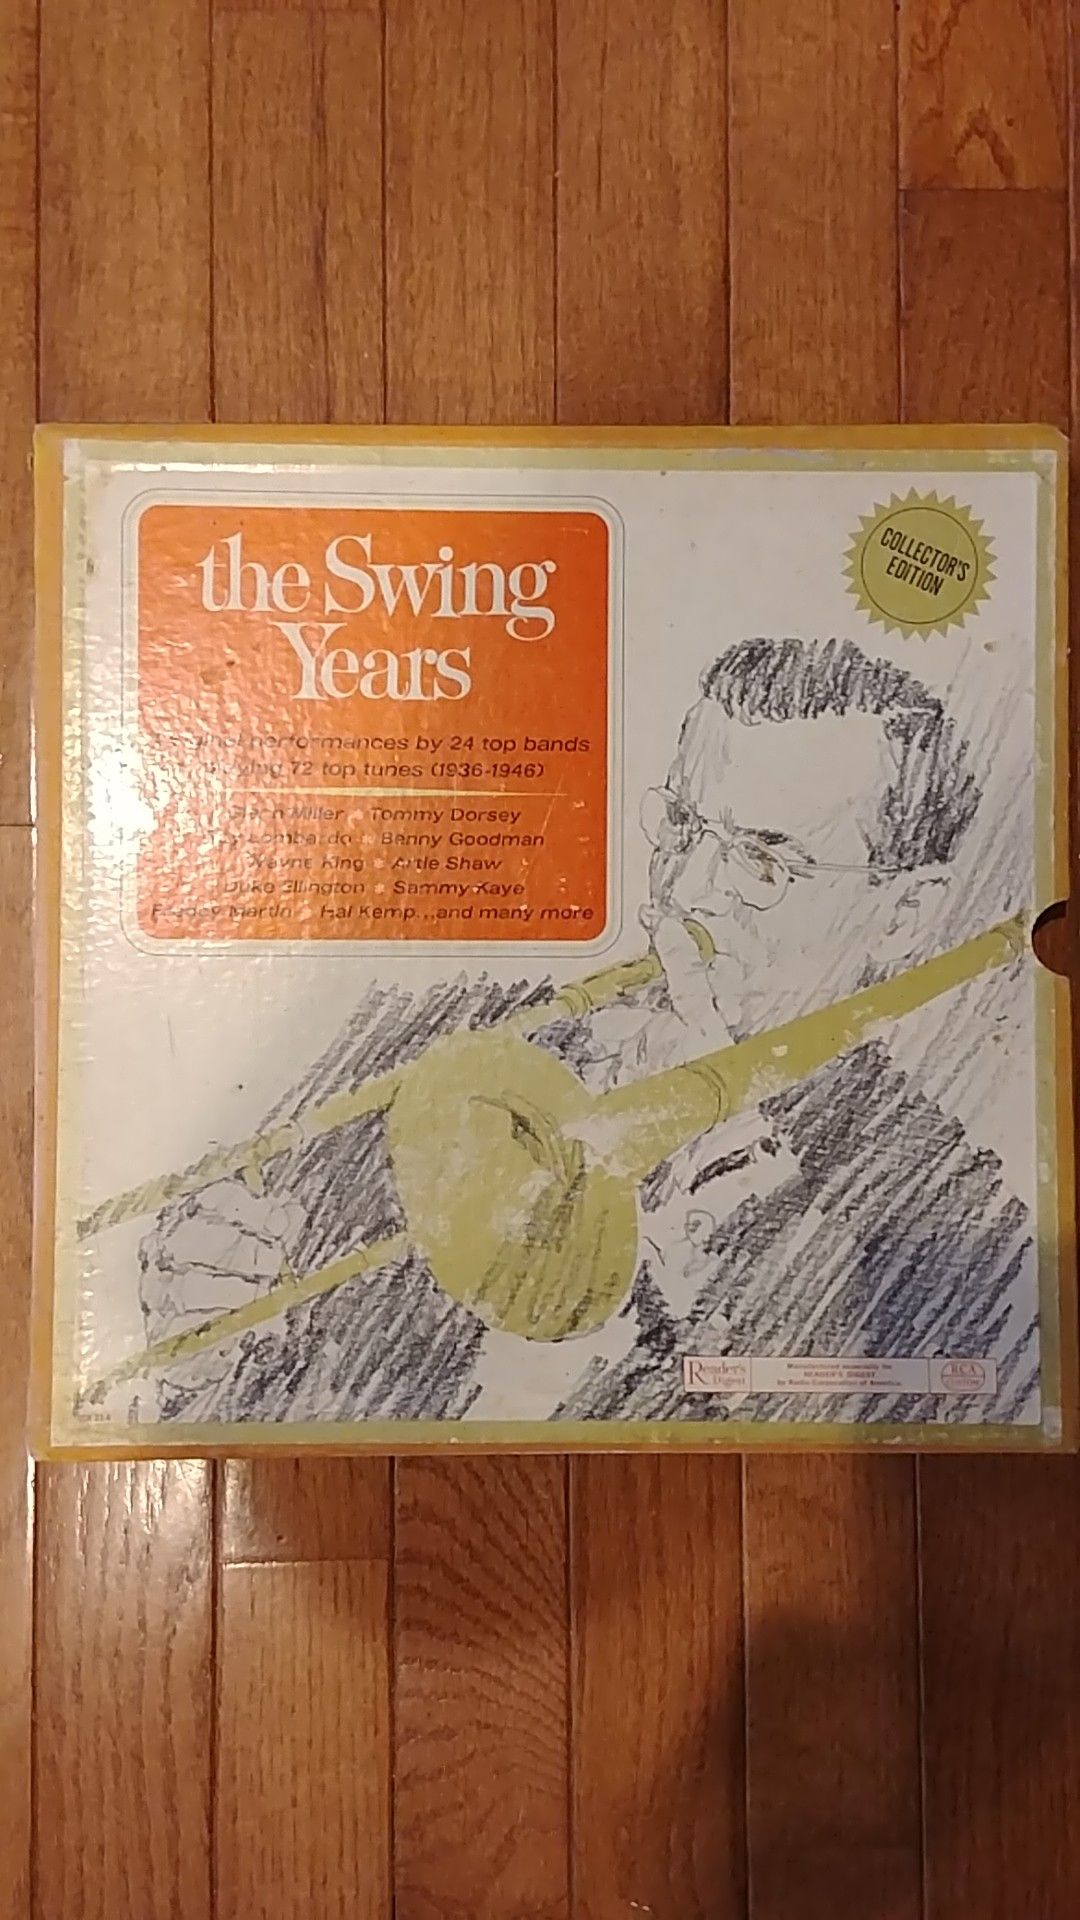 Reader's Digest "The Swing Years" Collector's Edition 6 Vinyl LP Album Box Set